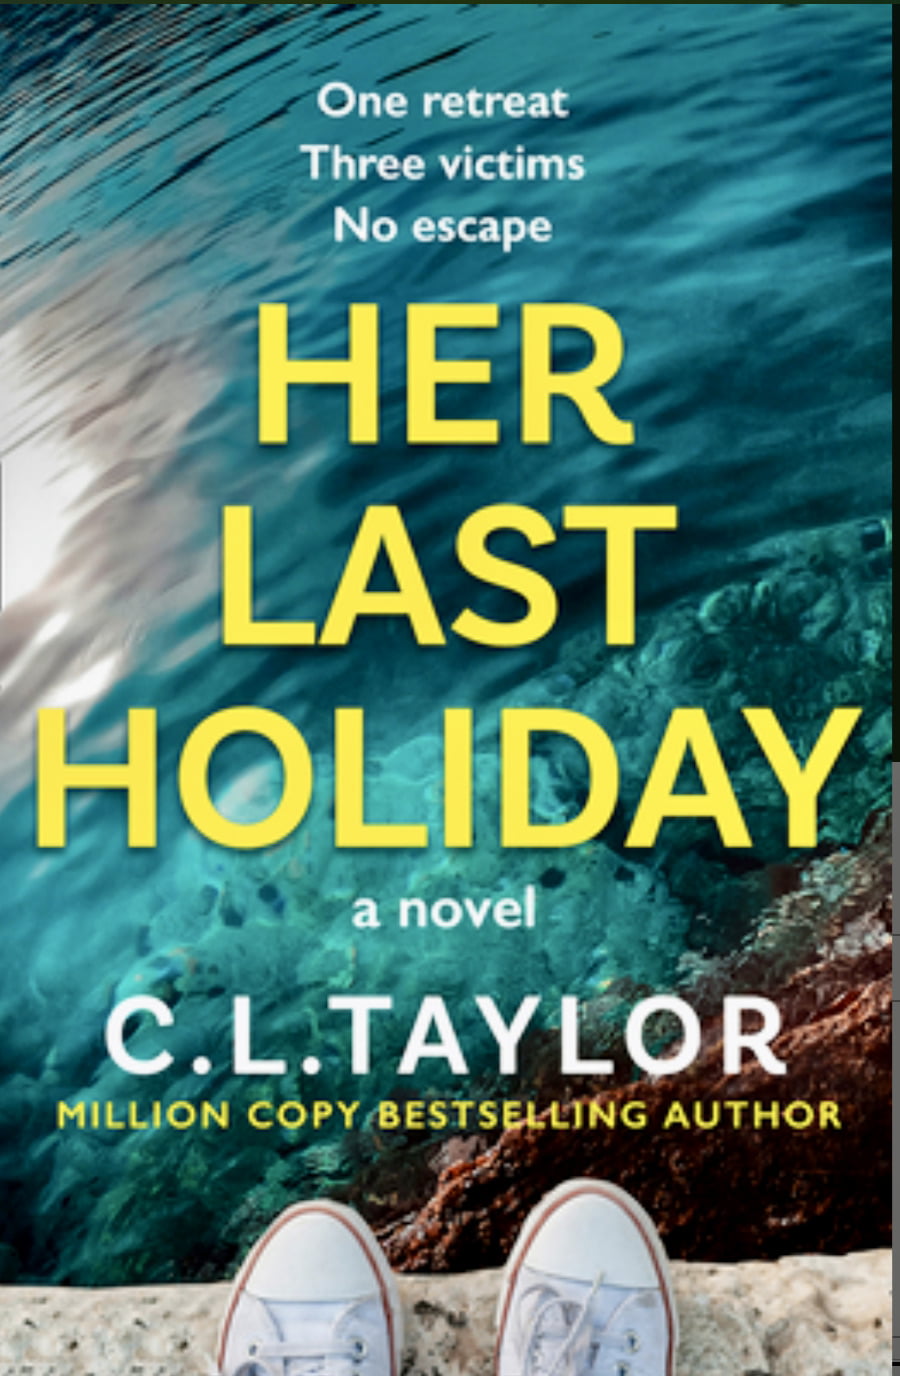 HER LAST HOLIDAY BY C.L. TAYLOR – BOOK REVIEW